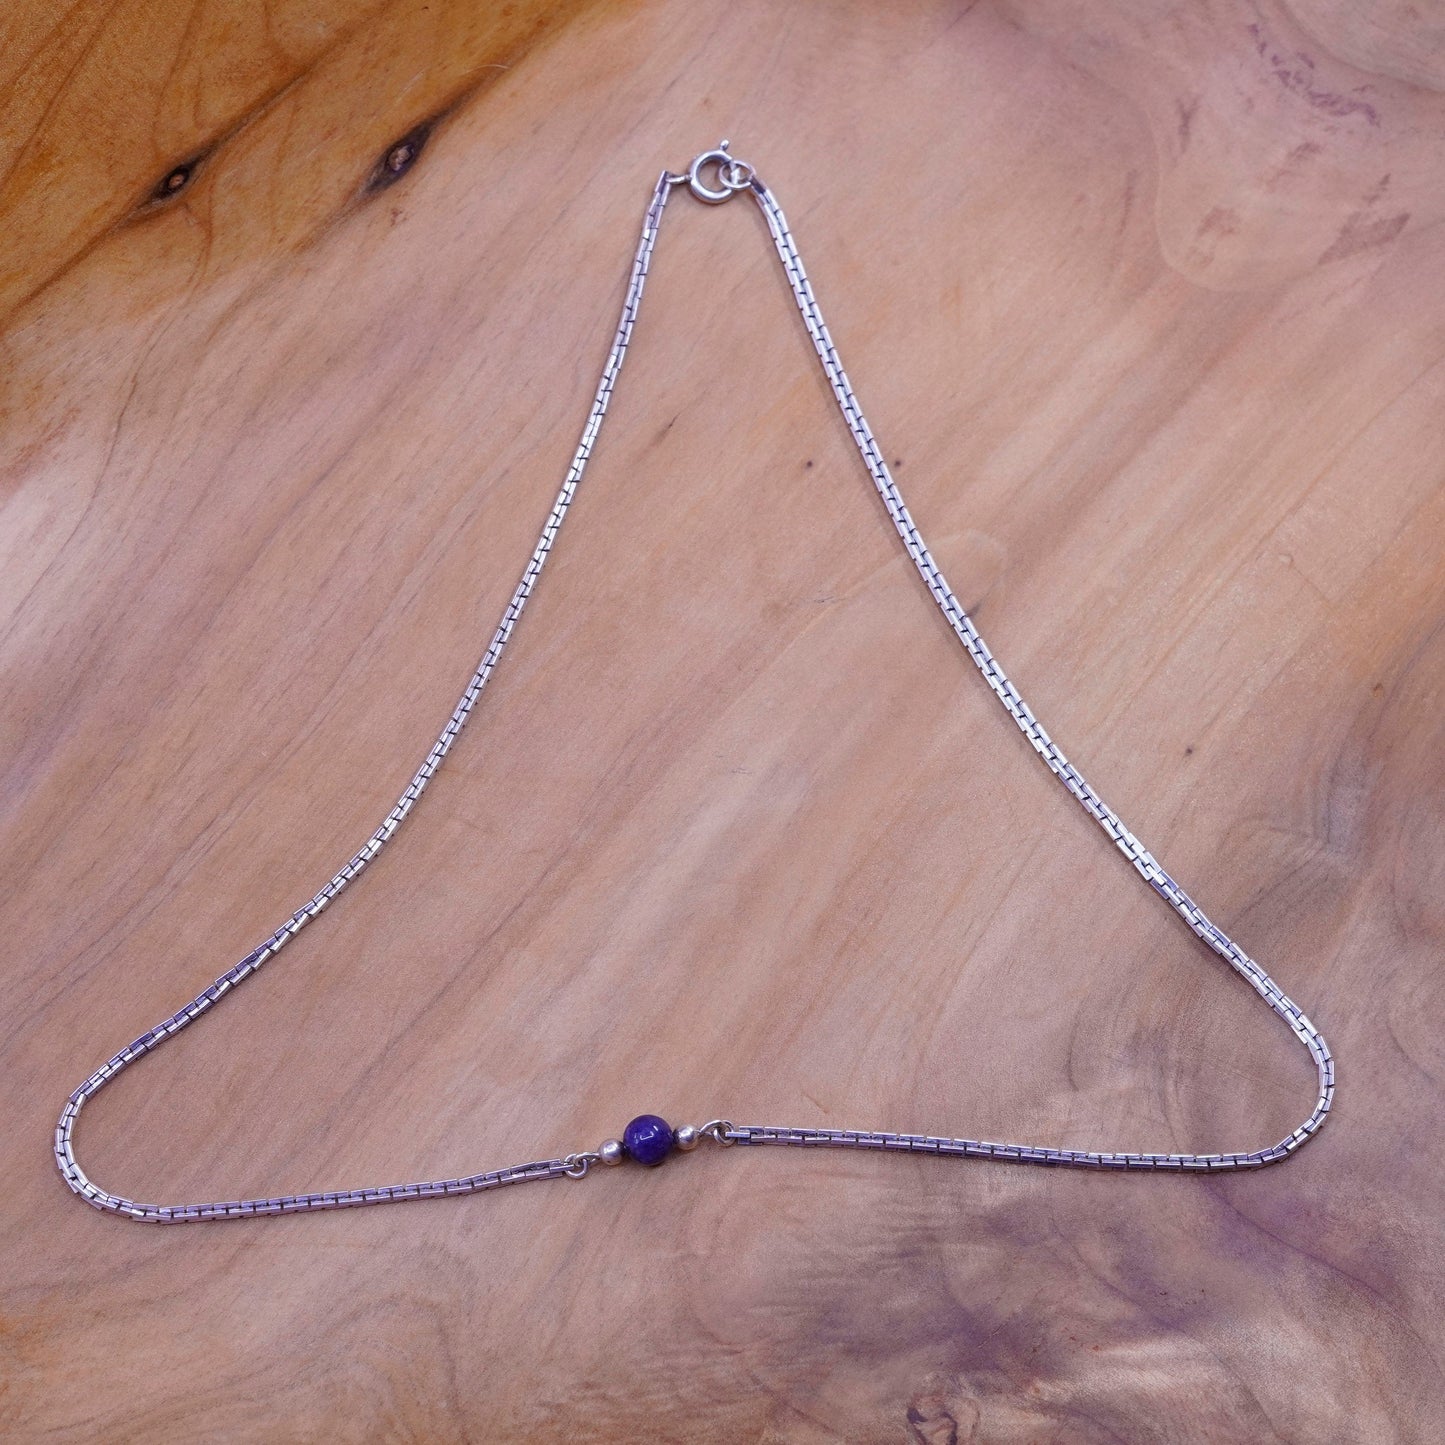 18”, sterling silver handmade necklace, 925 snake chain with lapis bead pendant